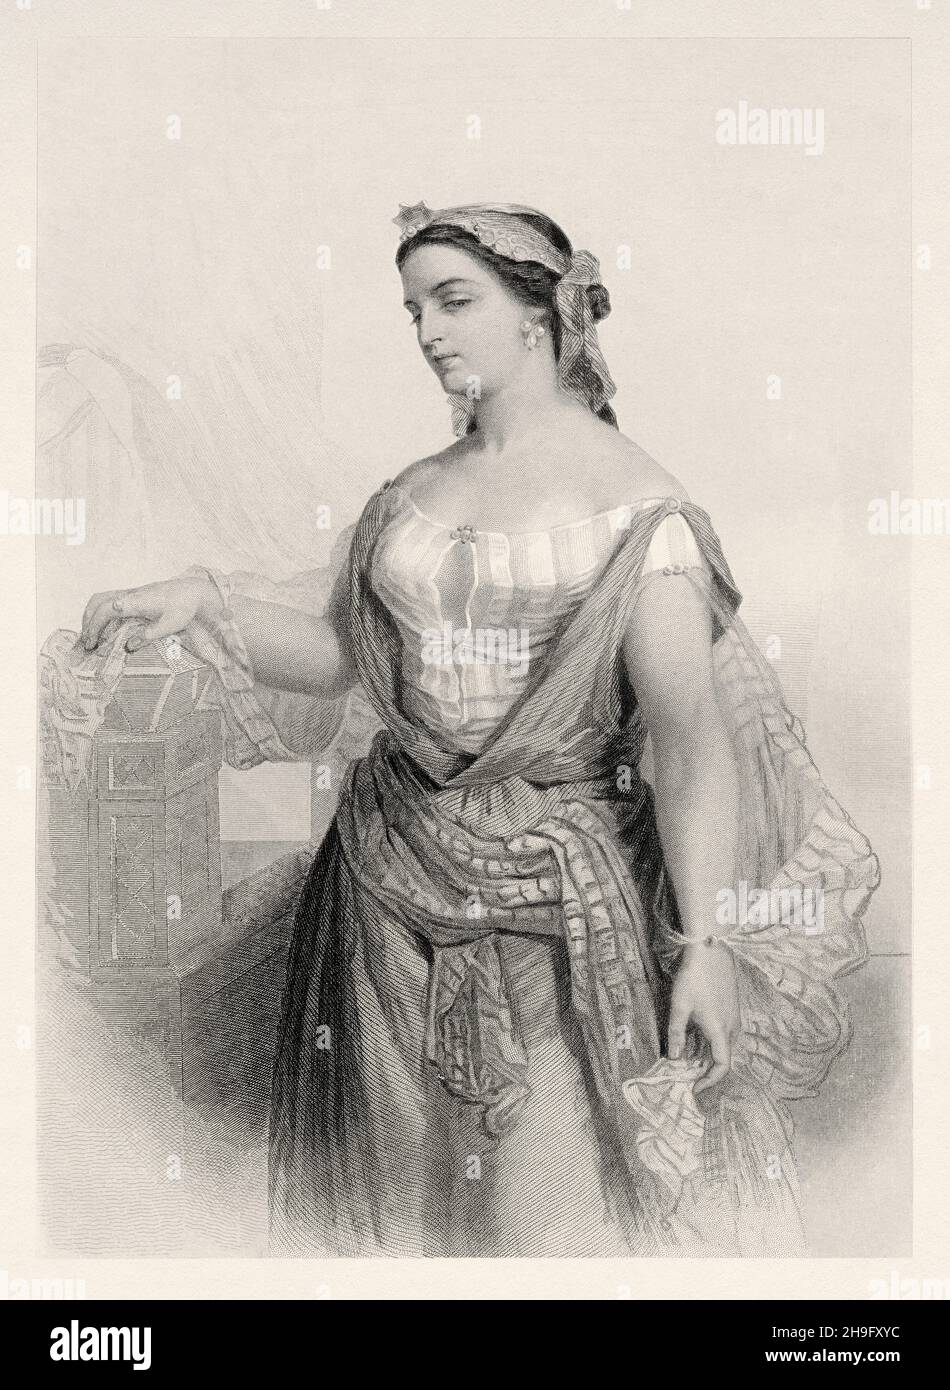 Esther (born Hadassah) was a woman in the Hebrew Bible, the queen of Ahasuerus and the heroine of the Biblical Book of Esther. Old 19th century engraved illustration from Mugeres de la Biblia by Joaquin Roca y Cornet 1862 Stock Photo